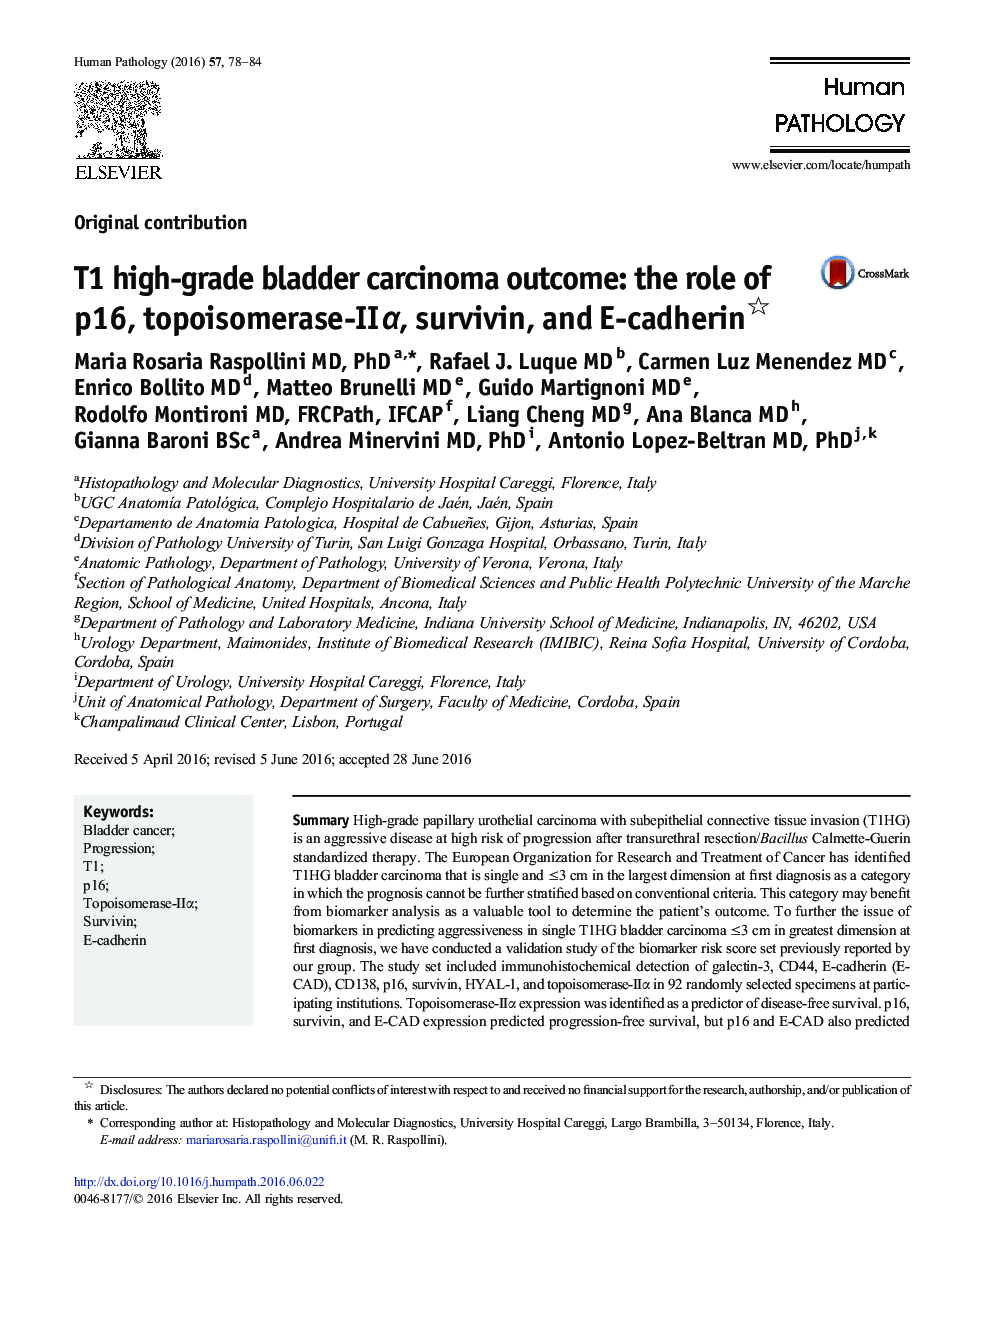 T1 high-grade bladder carcinoma outcome: the role of p16, topoisomerase-IIÎ±, survivin, and E-cadherin